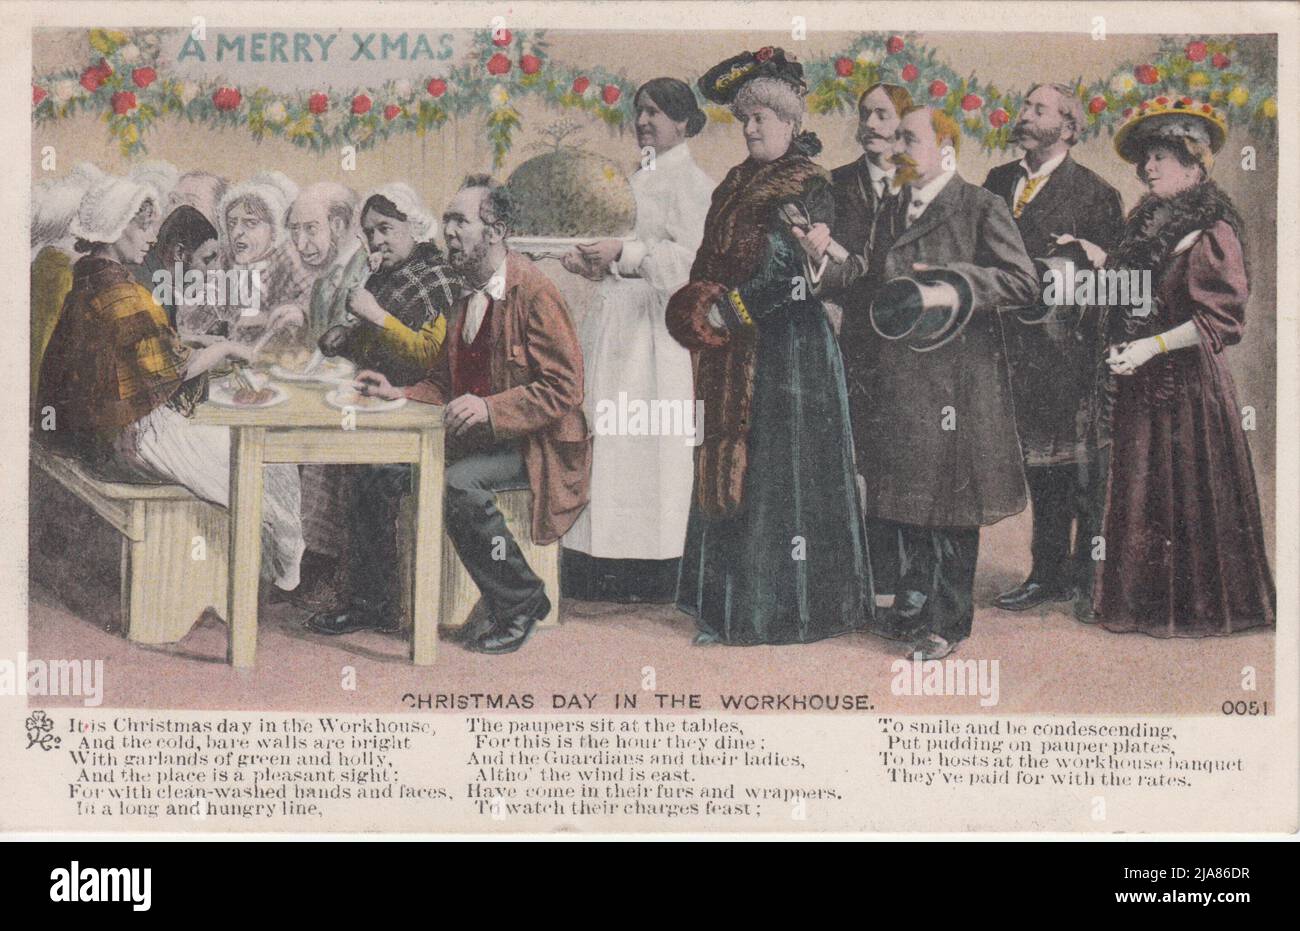 Satirical postcard on 'Christmas Day in the Workhouse', with poem - 'It is Christmas day in the Workhouse, And the cold, bare walls are bright With garlands of green & holly, And the place is a pleasant sight; For with clean-washed hands & faces, In a long & hungry line, The paupers sit at the tables, For this is the hour they dine; And the Guardians & their ladies, Altho' the wind is east, Have come in their furs & wrappers, To watch their charges feast; To smile & be condescending, Put pudding on pauper plates, To be hosts at the workhouse banquet They've paid for with the rates' Stock Photo